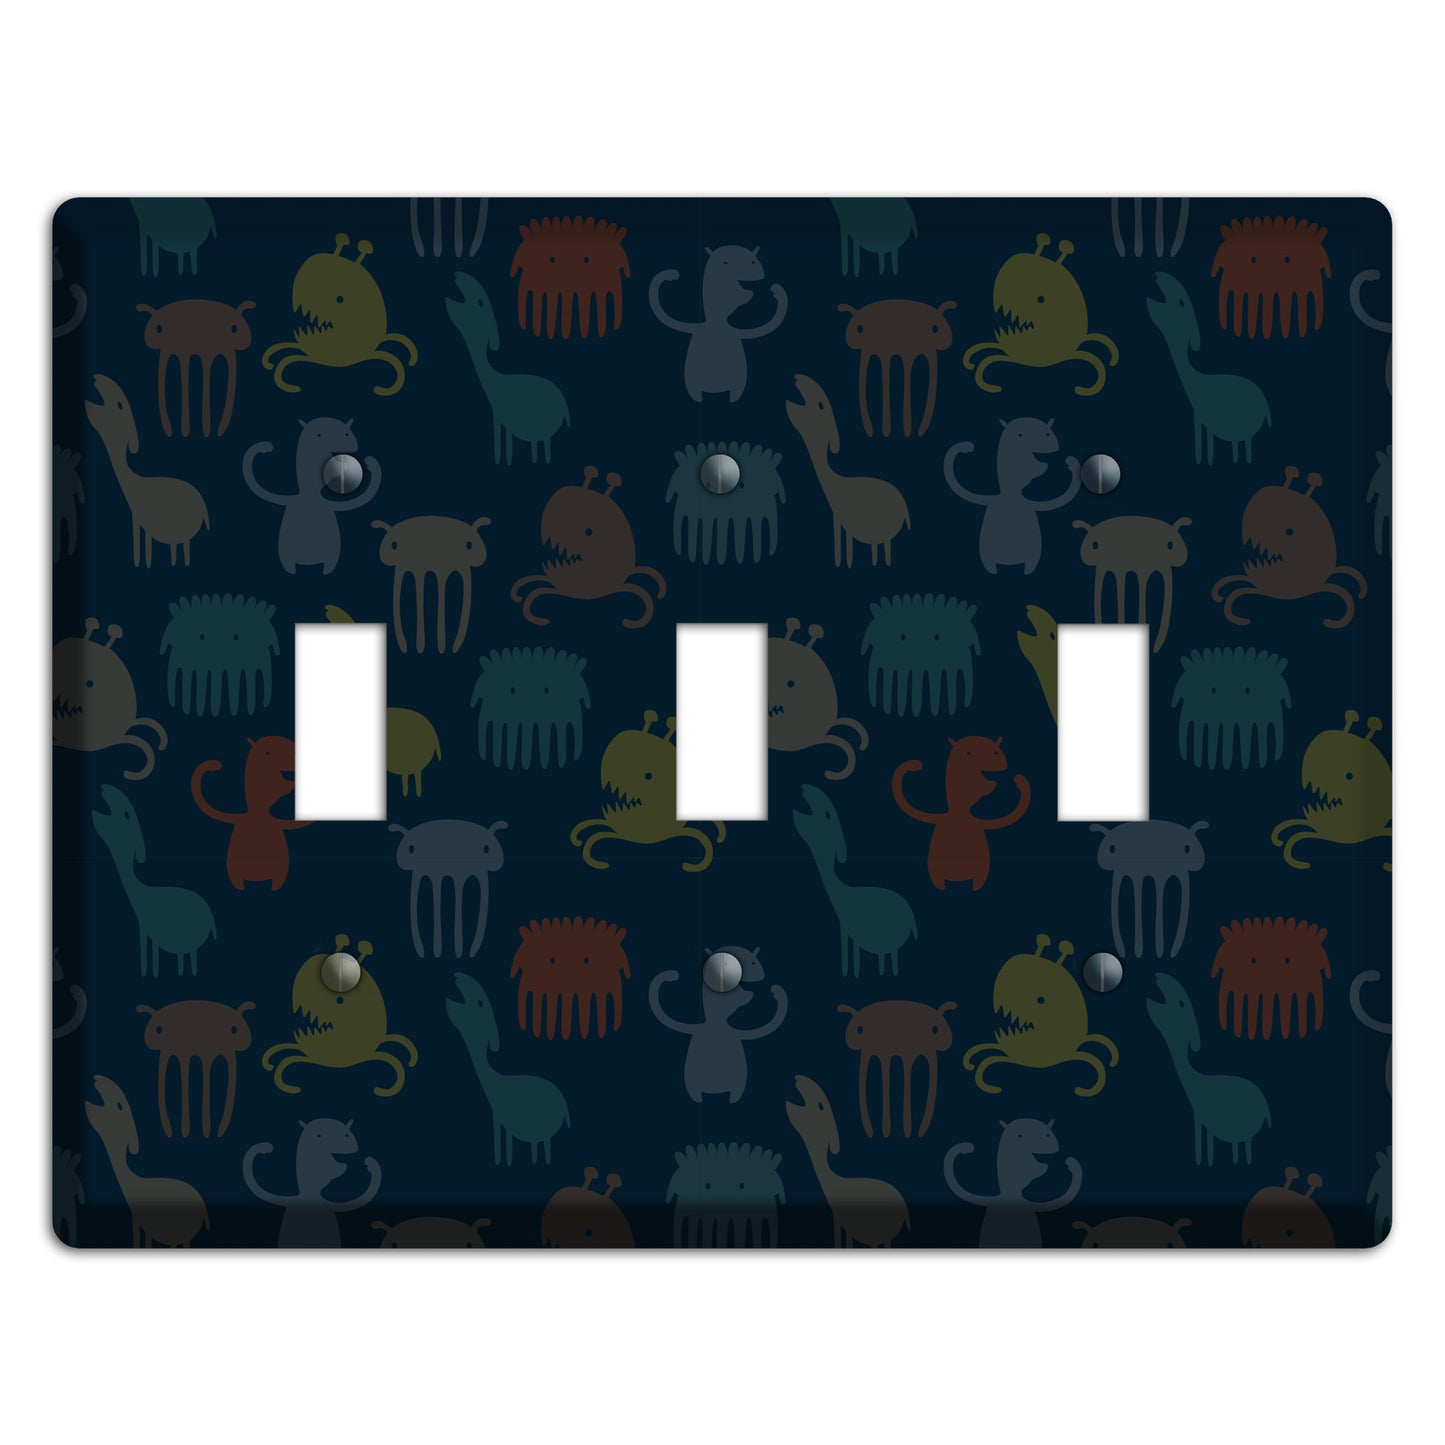 Silly Monsters Black 3 Toggle Wallplate